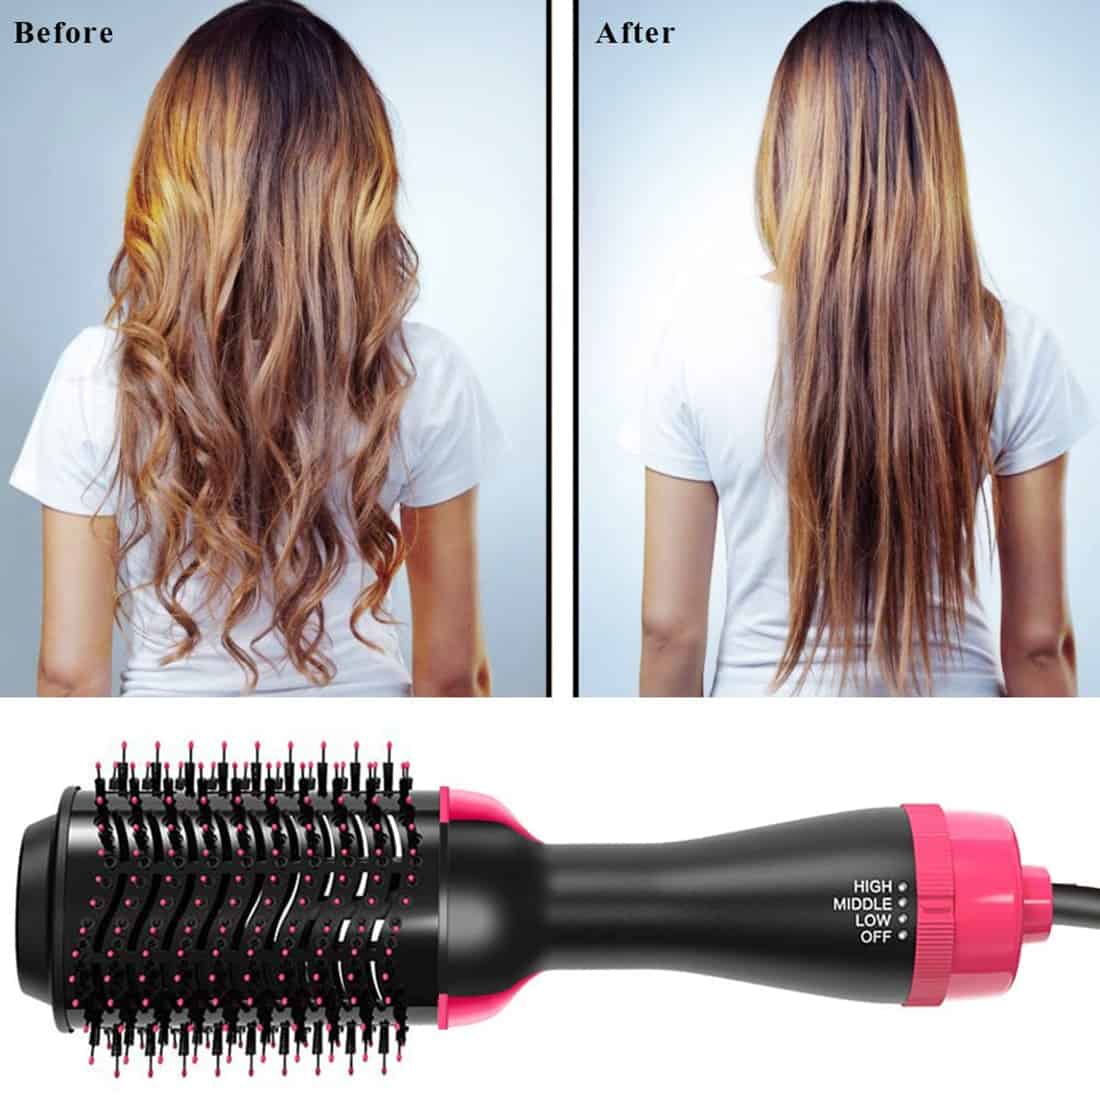 3 in 1 Hair Dryer Hot Air Comb Straightening Curling Brush Multifunctional Hair Straightener Hot Air Brush Salon Styling Tools